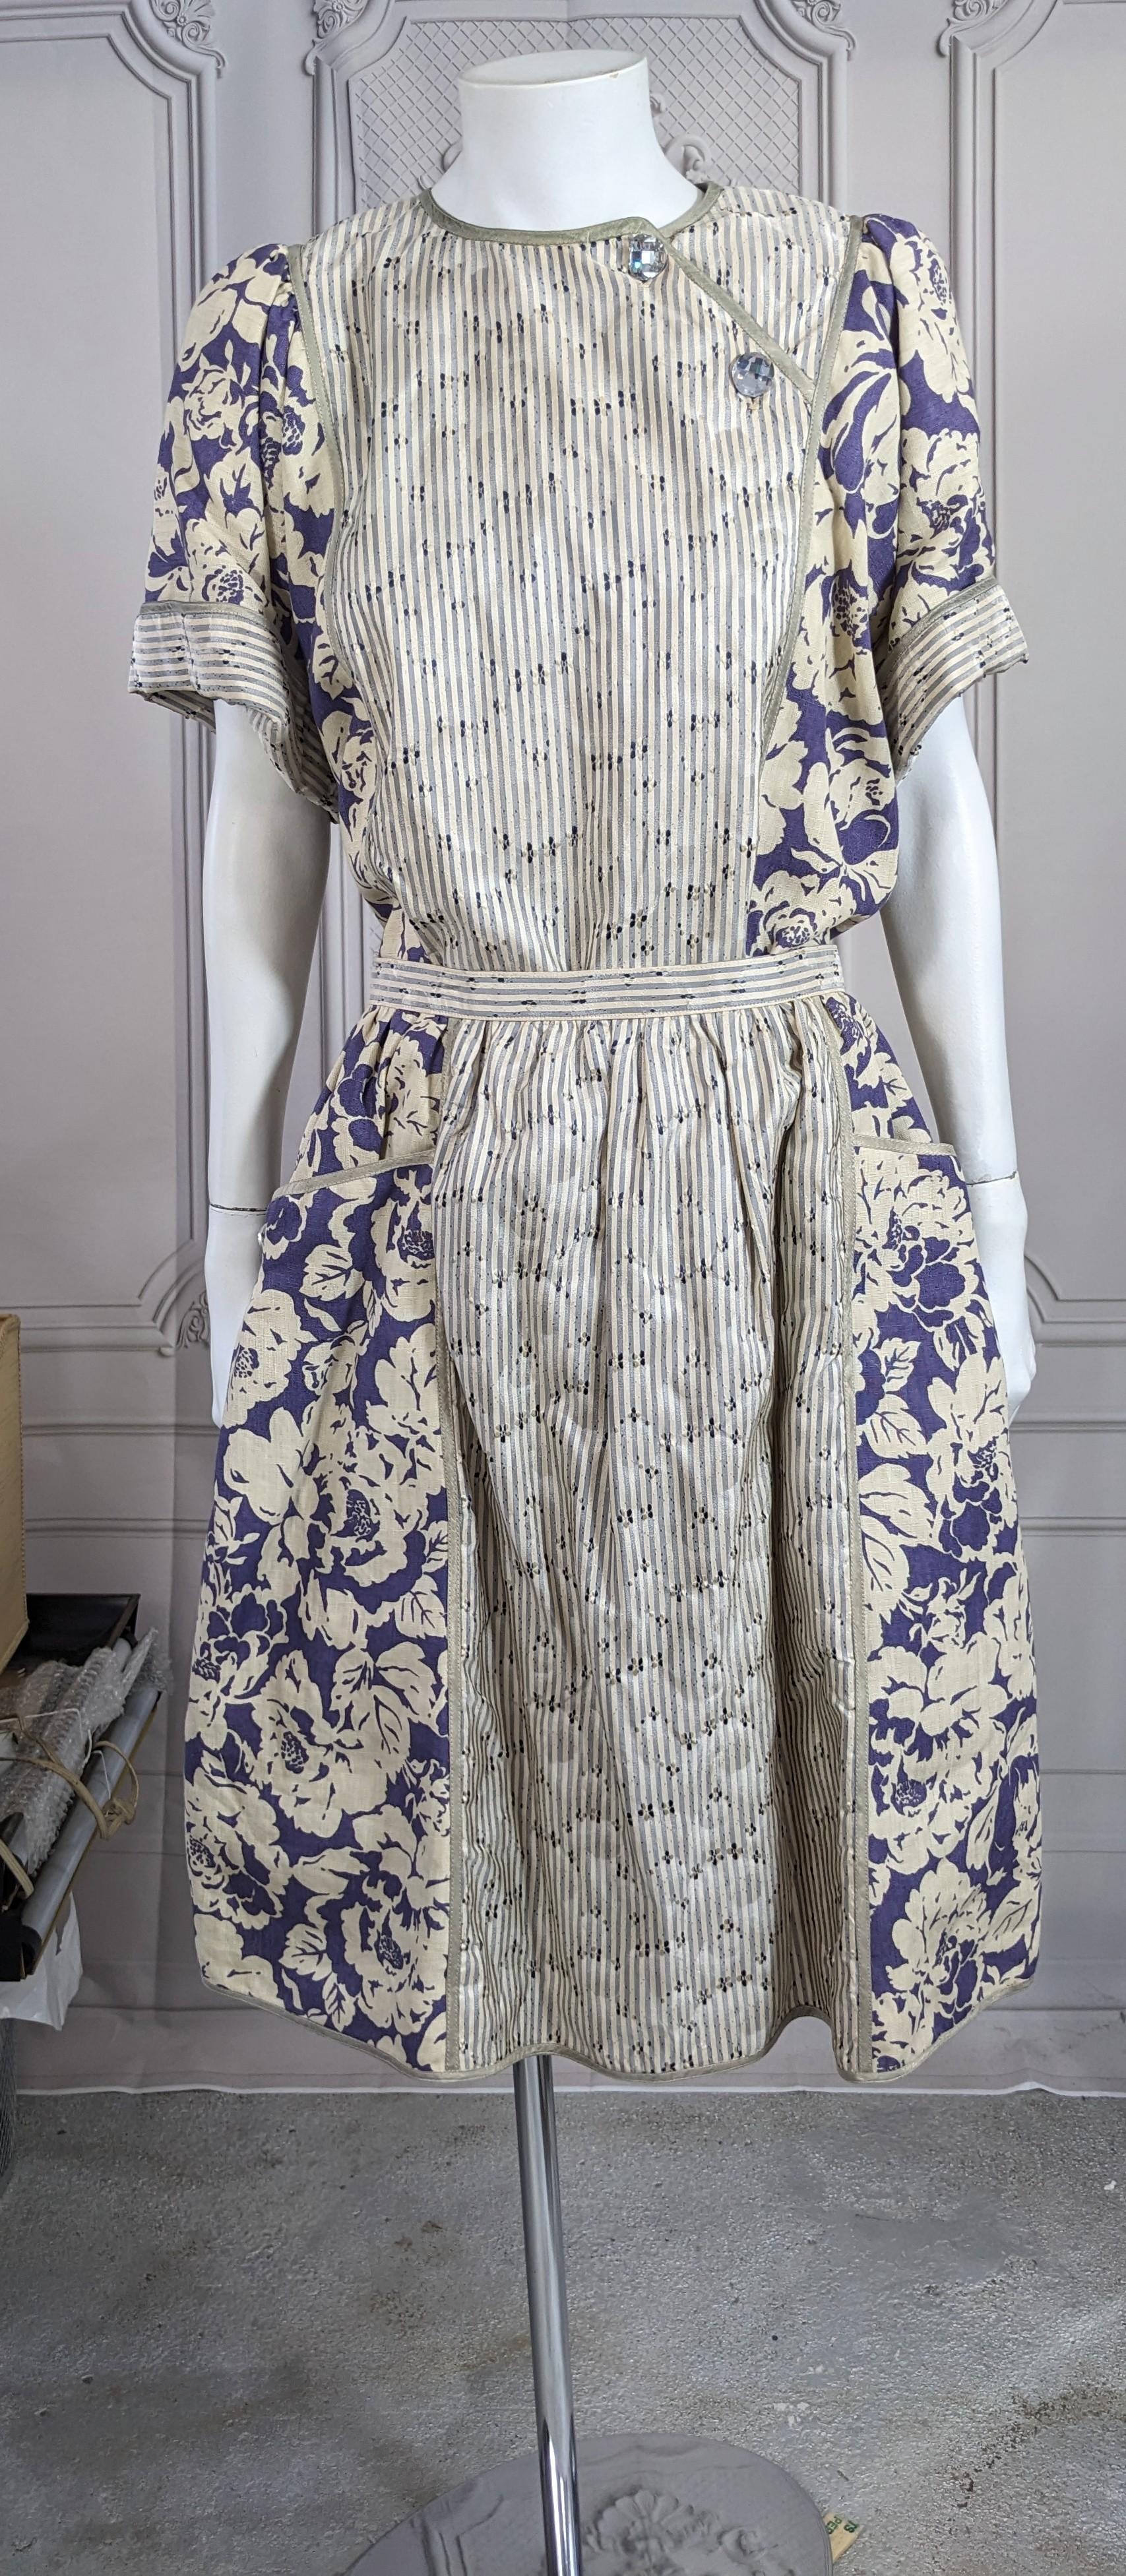 Geoffrey Beene Linen and Silk Taffeta Ensemble from the 1990's. A 2 piece outfit with simple puff sleeved T shirt top and full gathered skirt. As with all Beene pieces, the detailing is exquisite. Purple floral linen is paired with a tonal silk